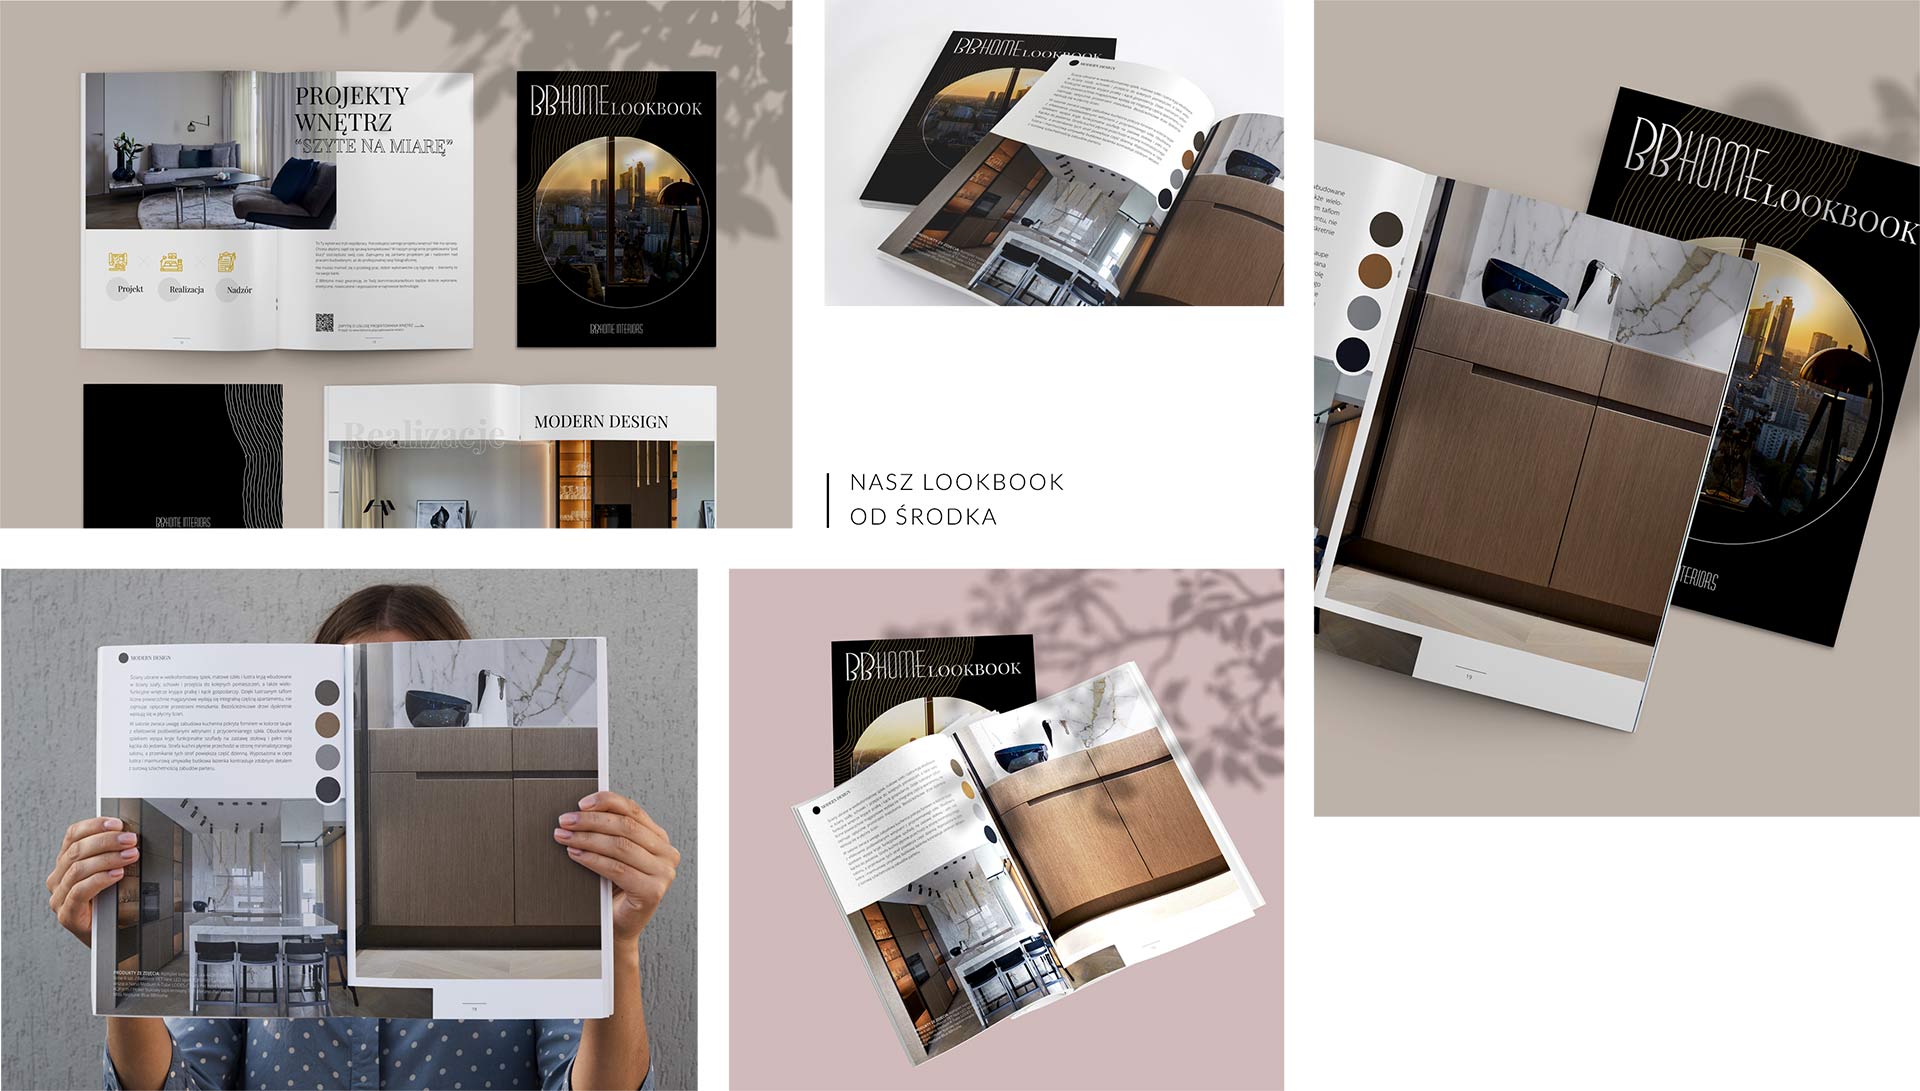 A lookbook from BBHome about interior design